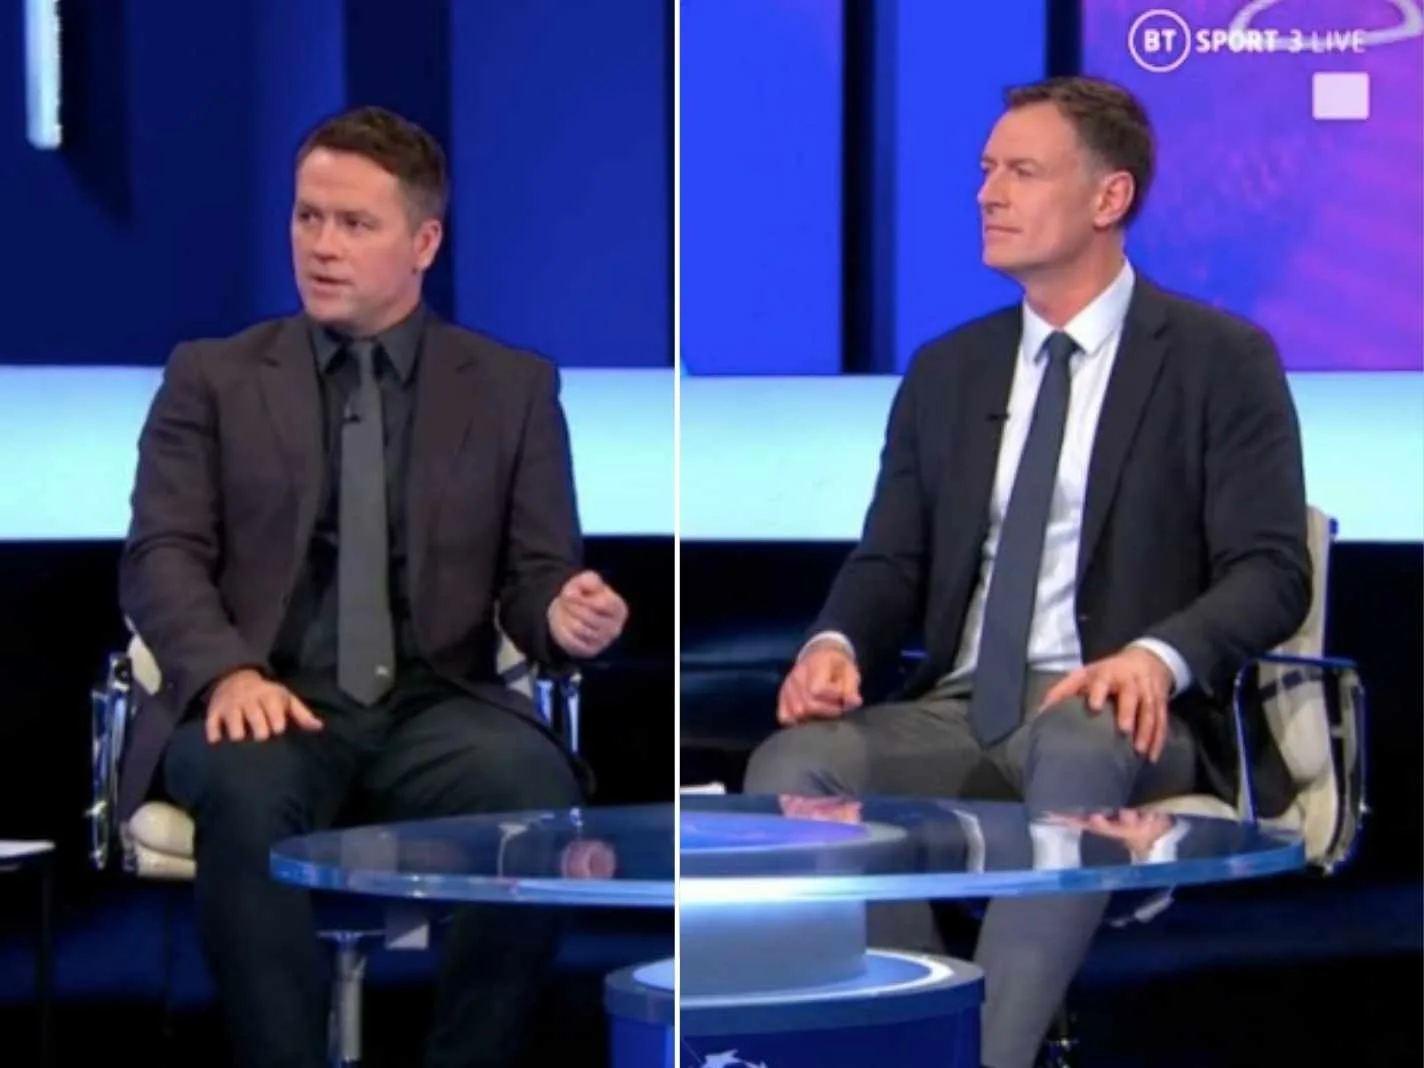 Michael Owen and Chris Sutton got into a heated debate over concussion protocols in football